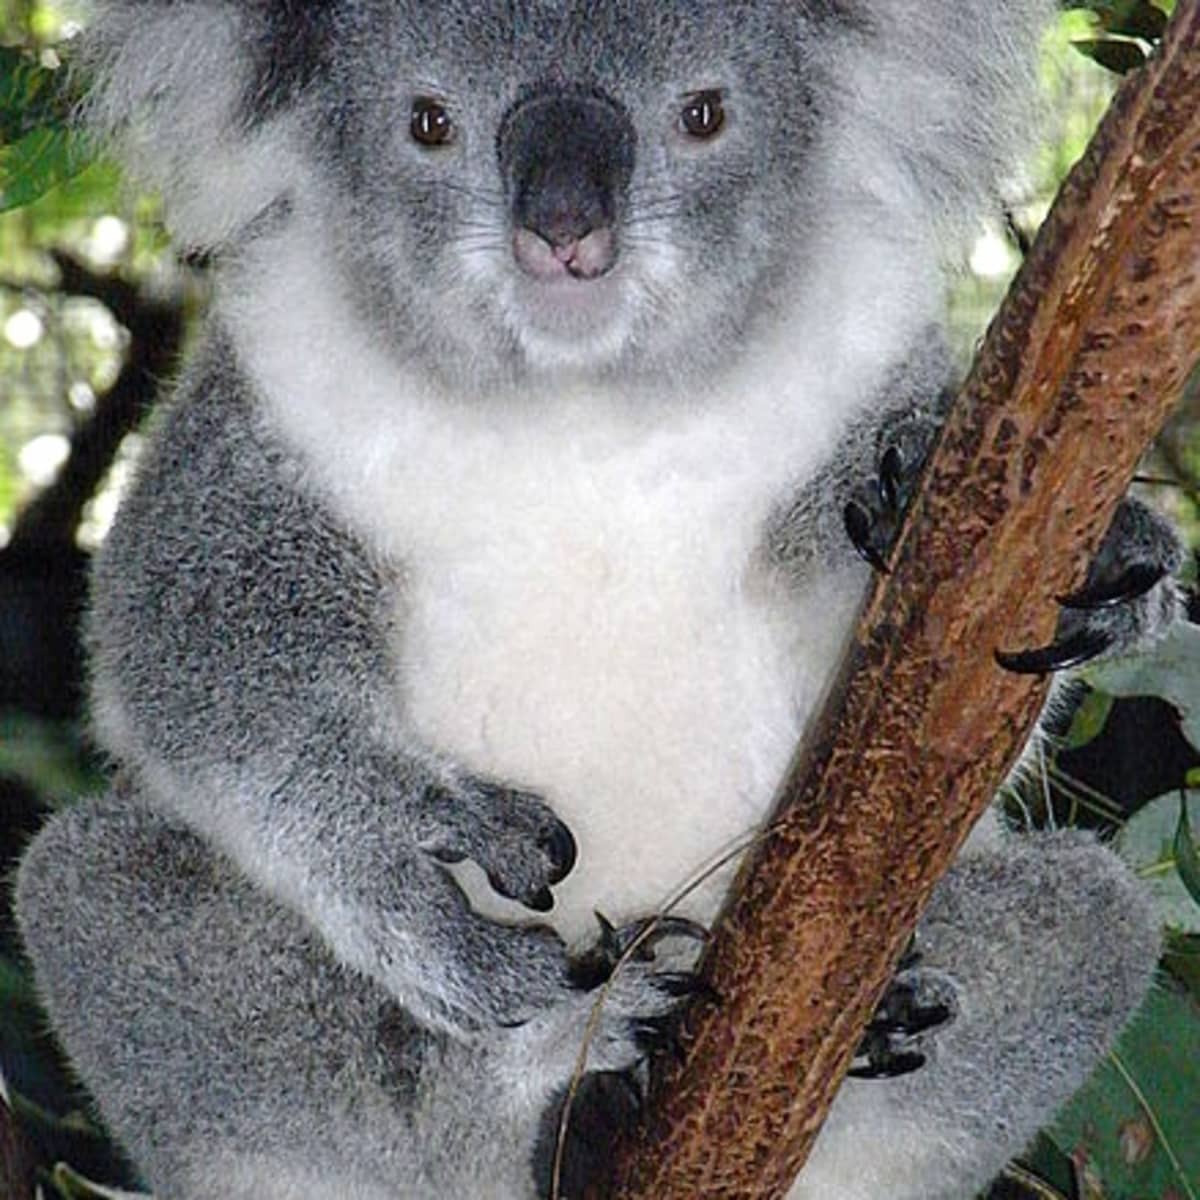 Koalas are cute, but they don't belong here